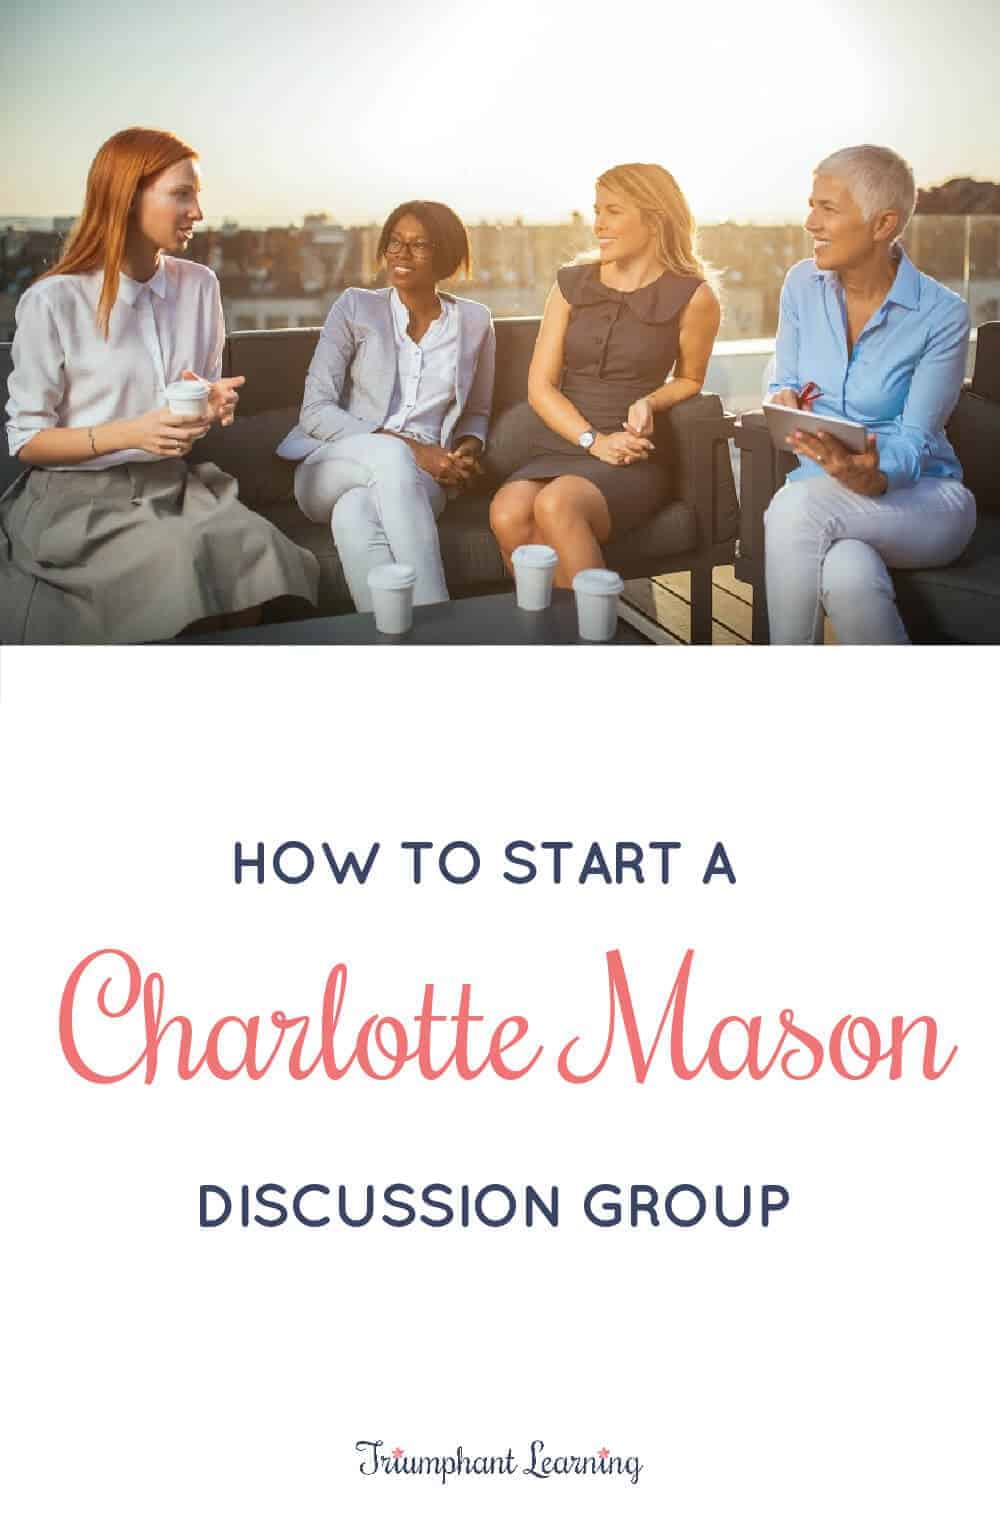 Learn how you can start a Charlotte Mason Discussion Group to help encourage and equip you to implement her philosophy in your homeschool. via @TriLearning